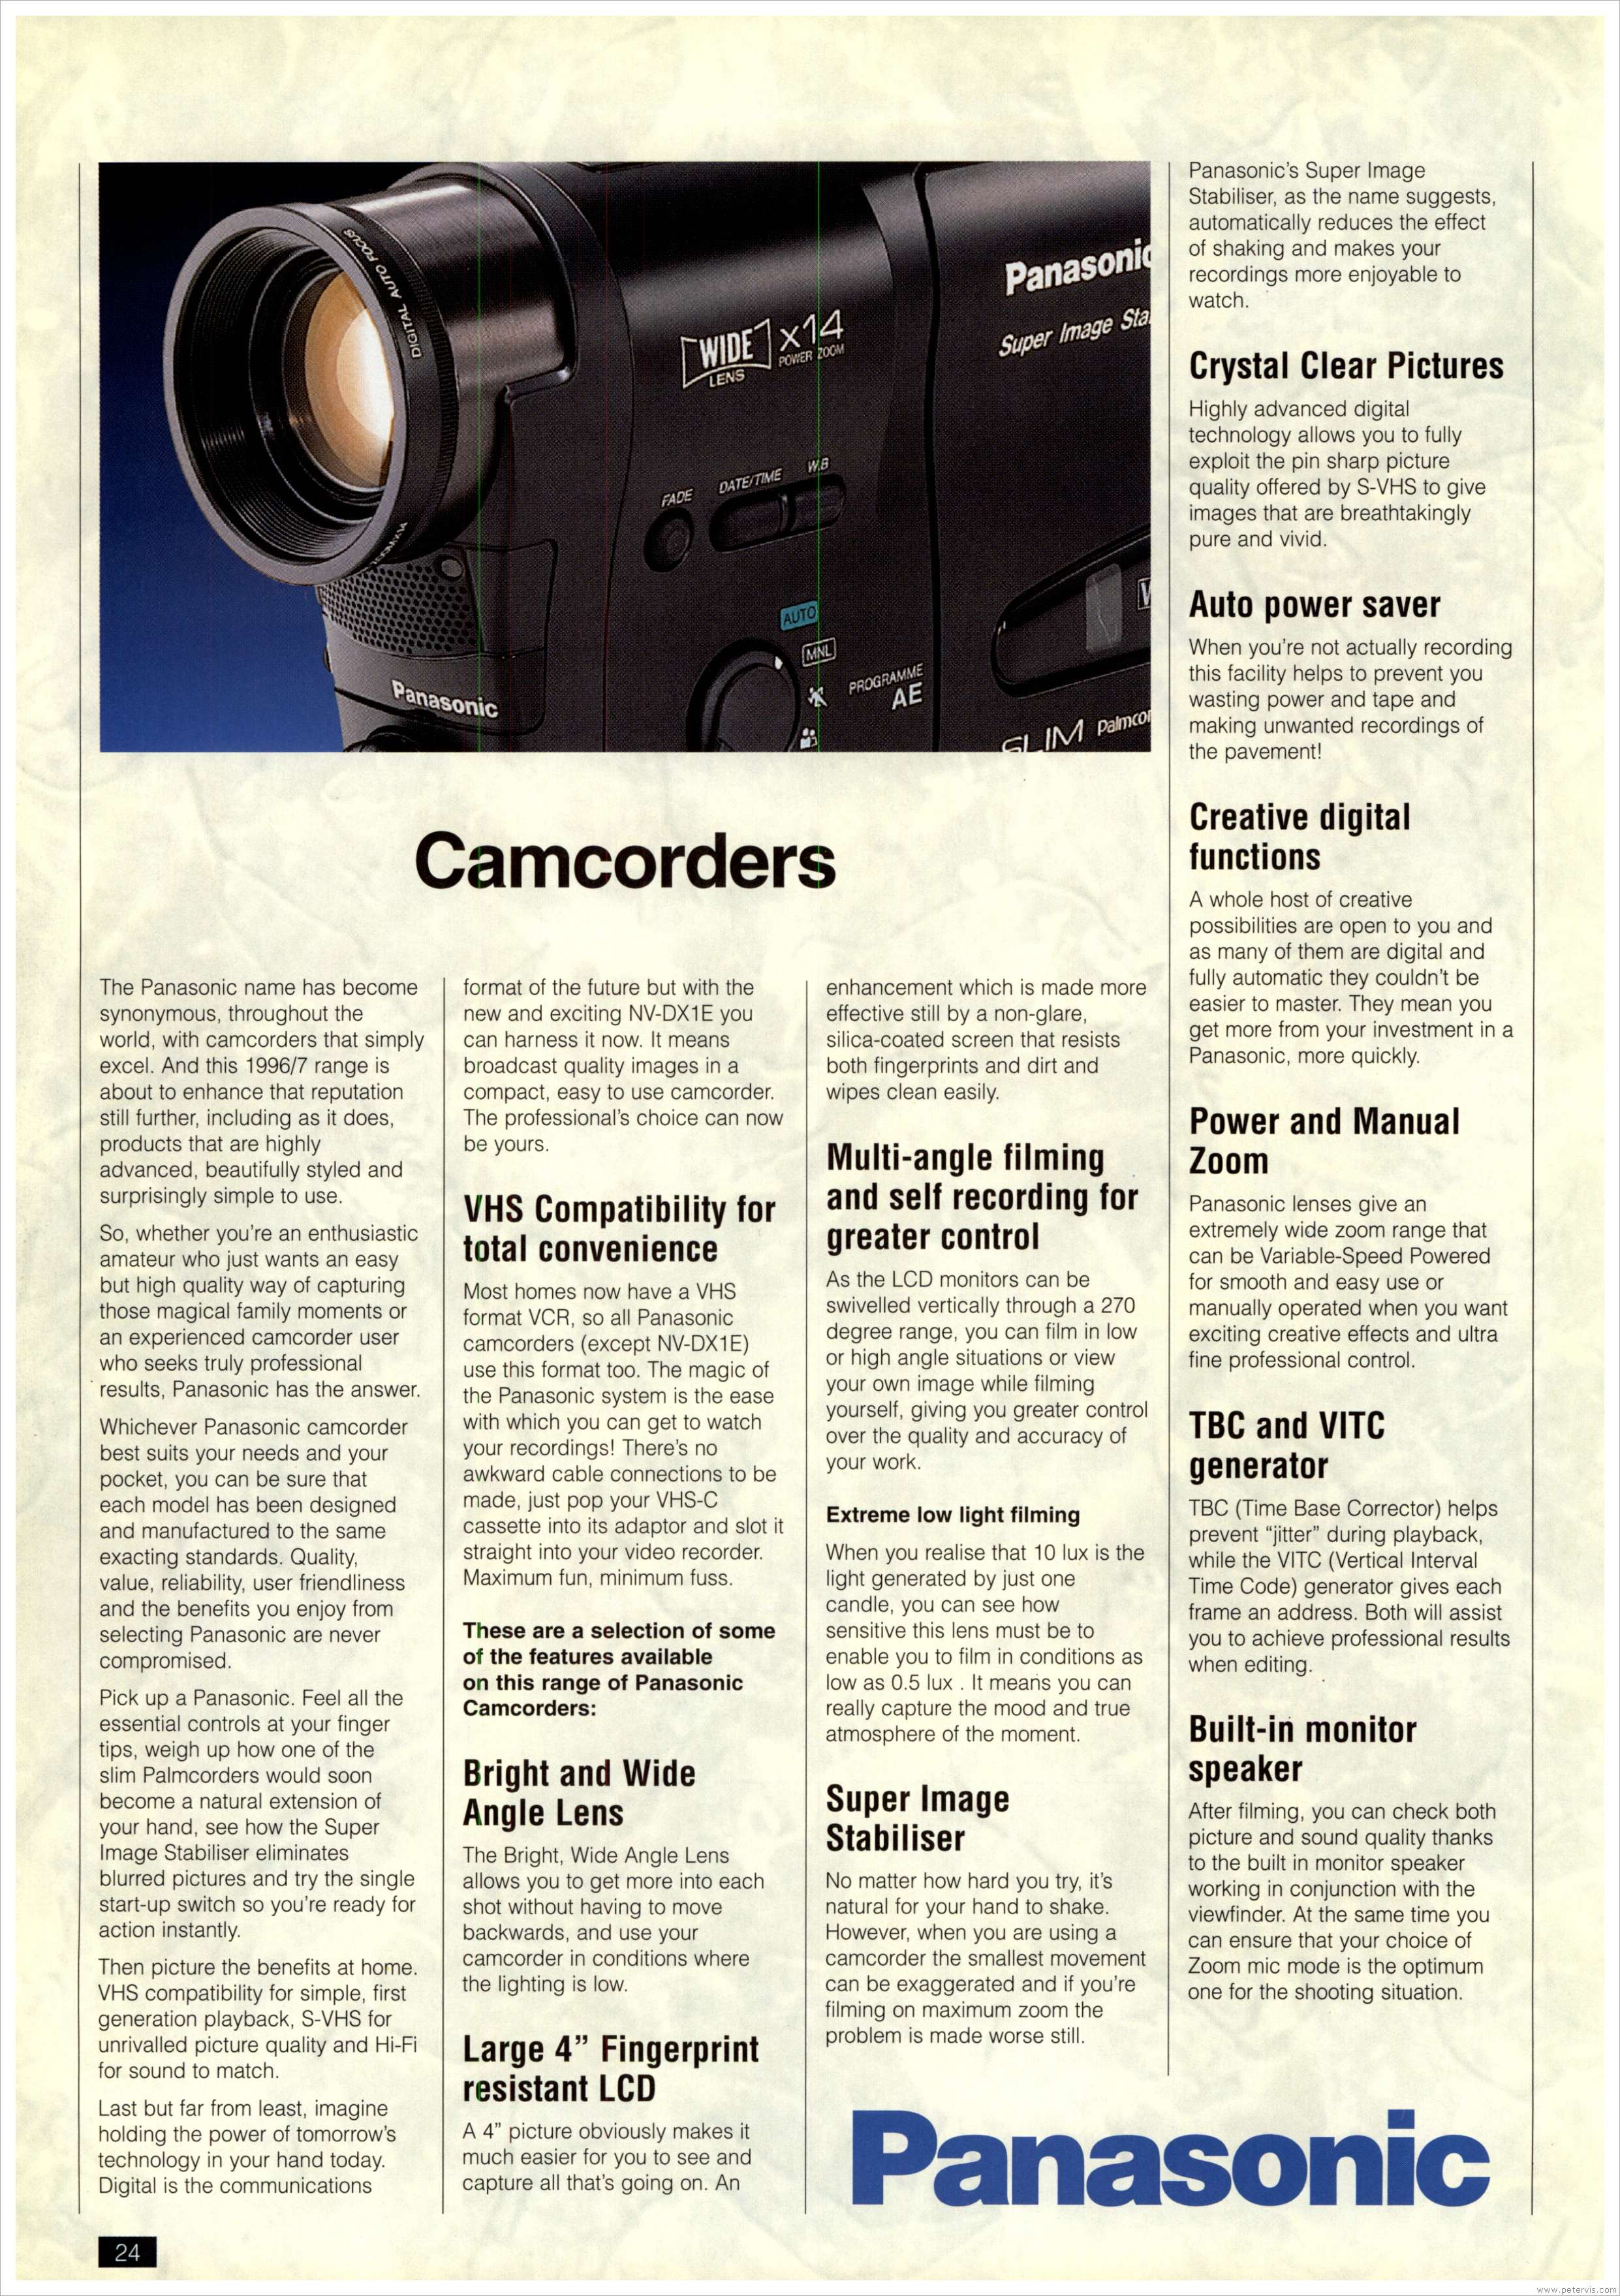 Camcorder Technology